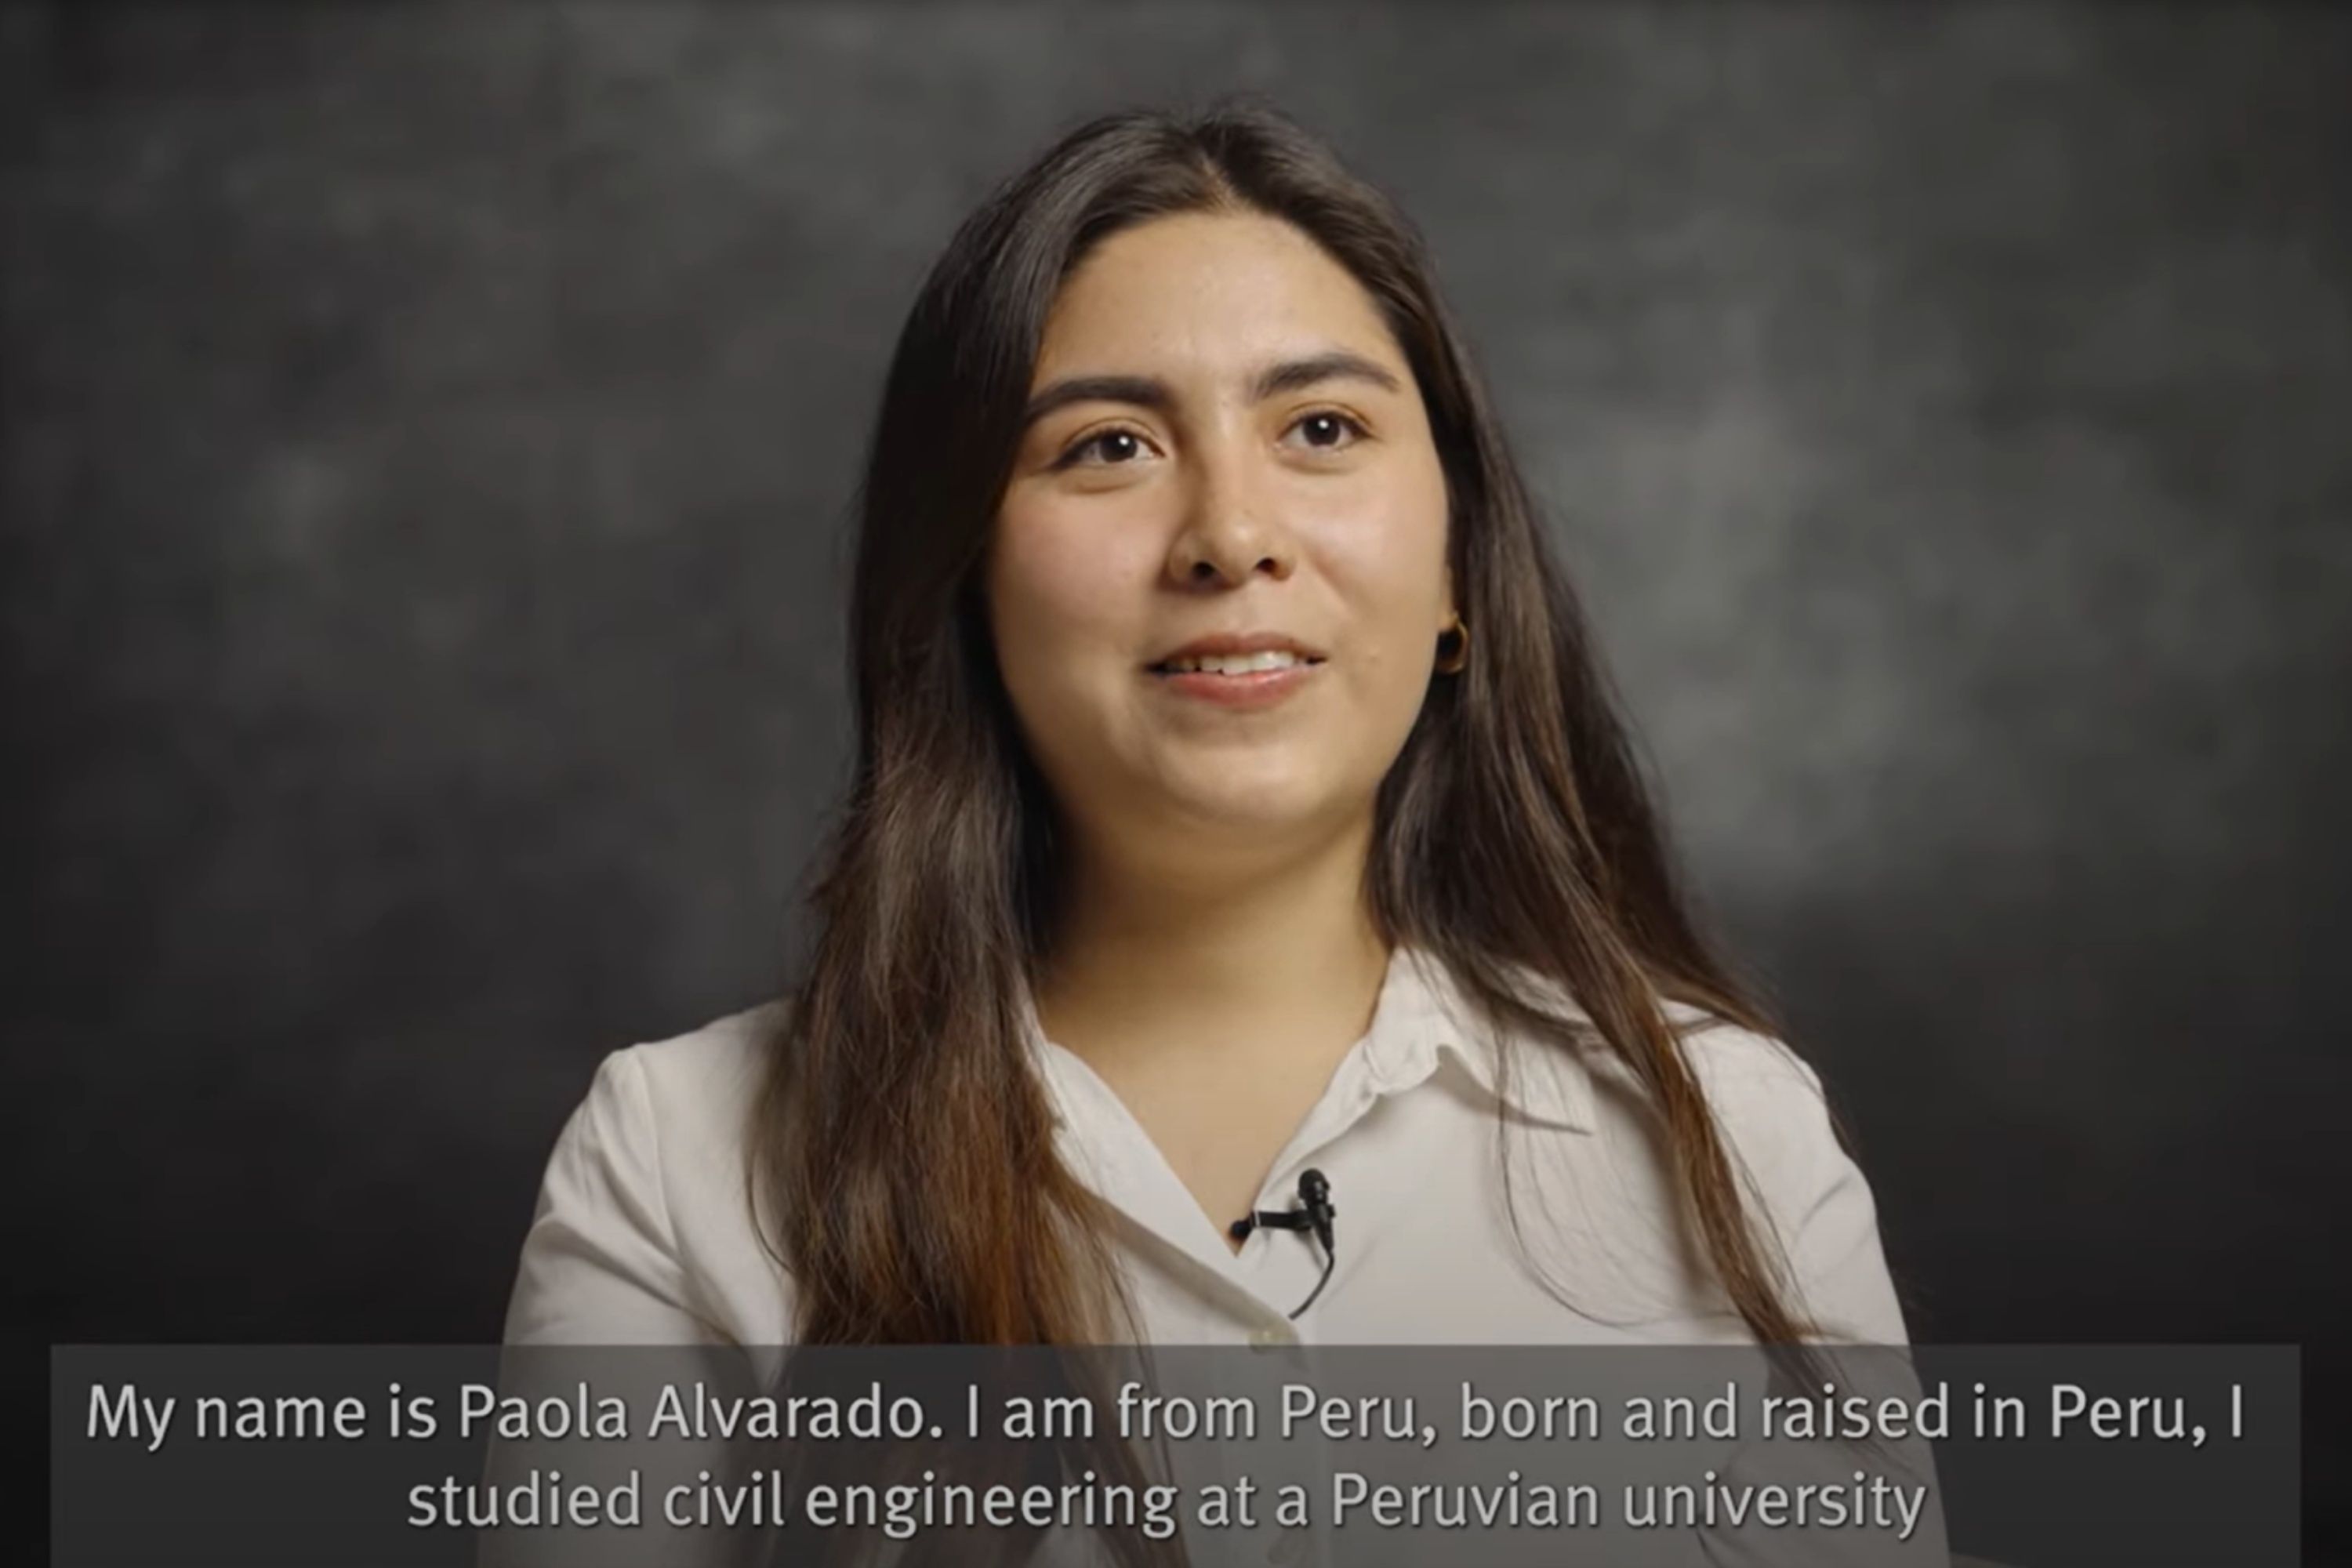 Our Latina researchers introduce themselves.